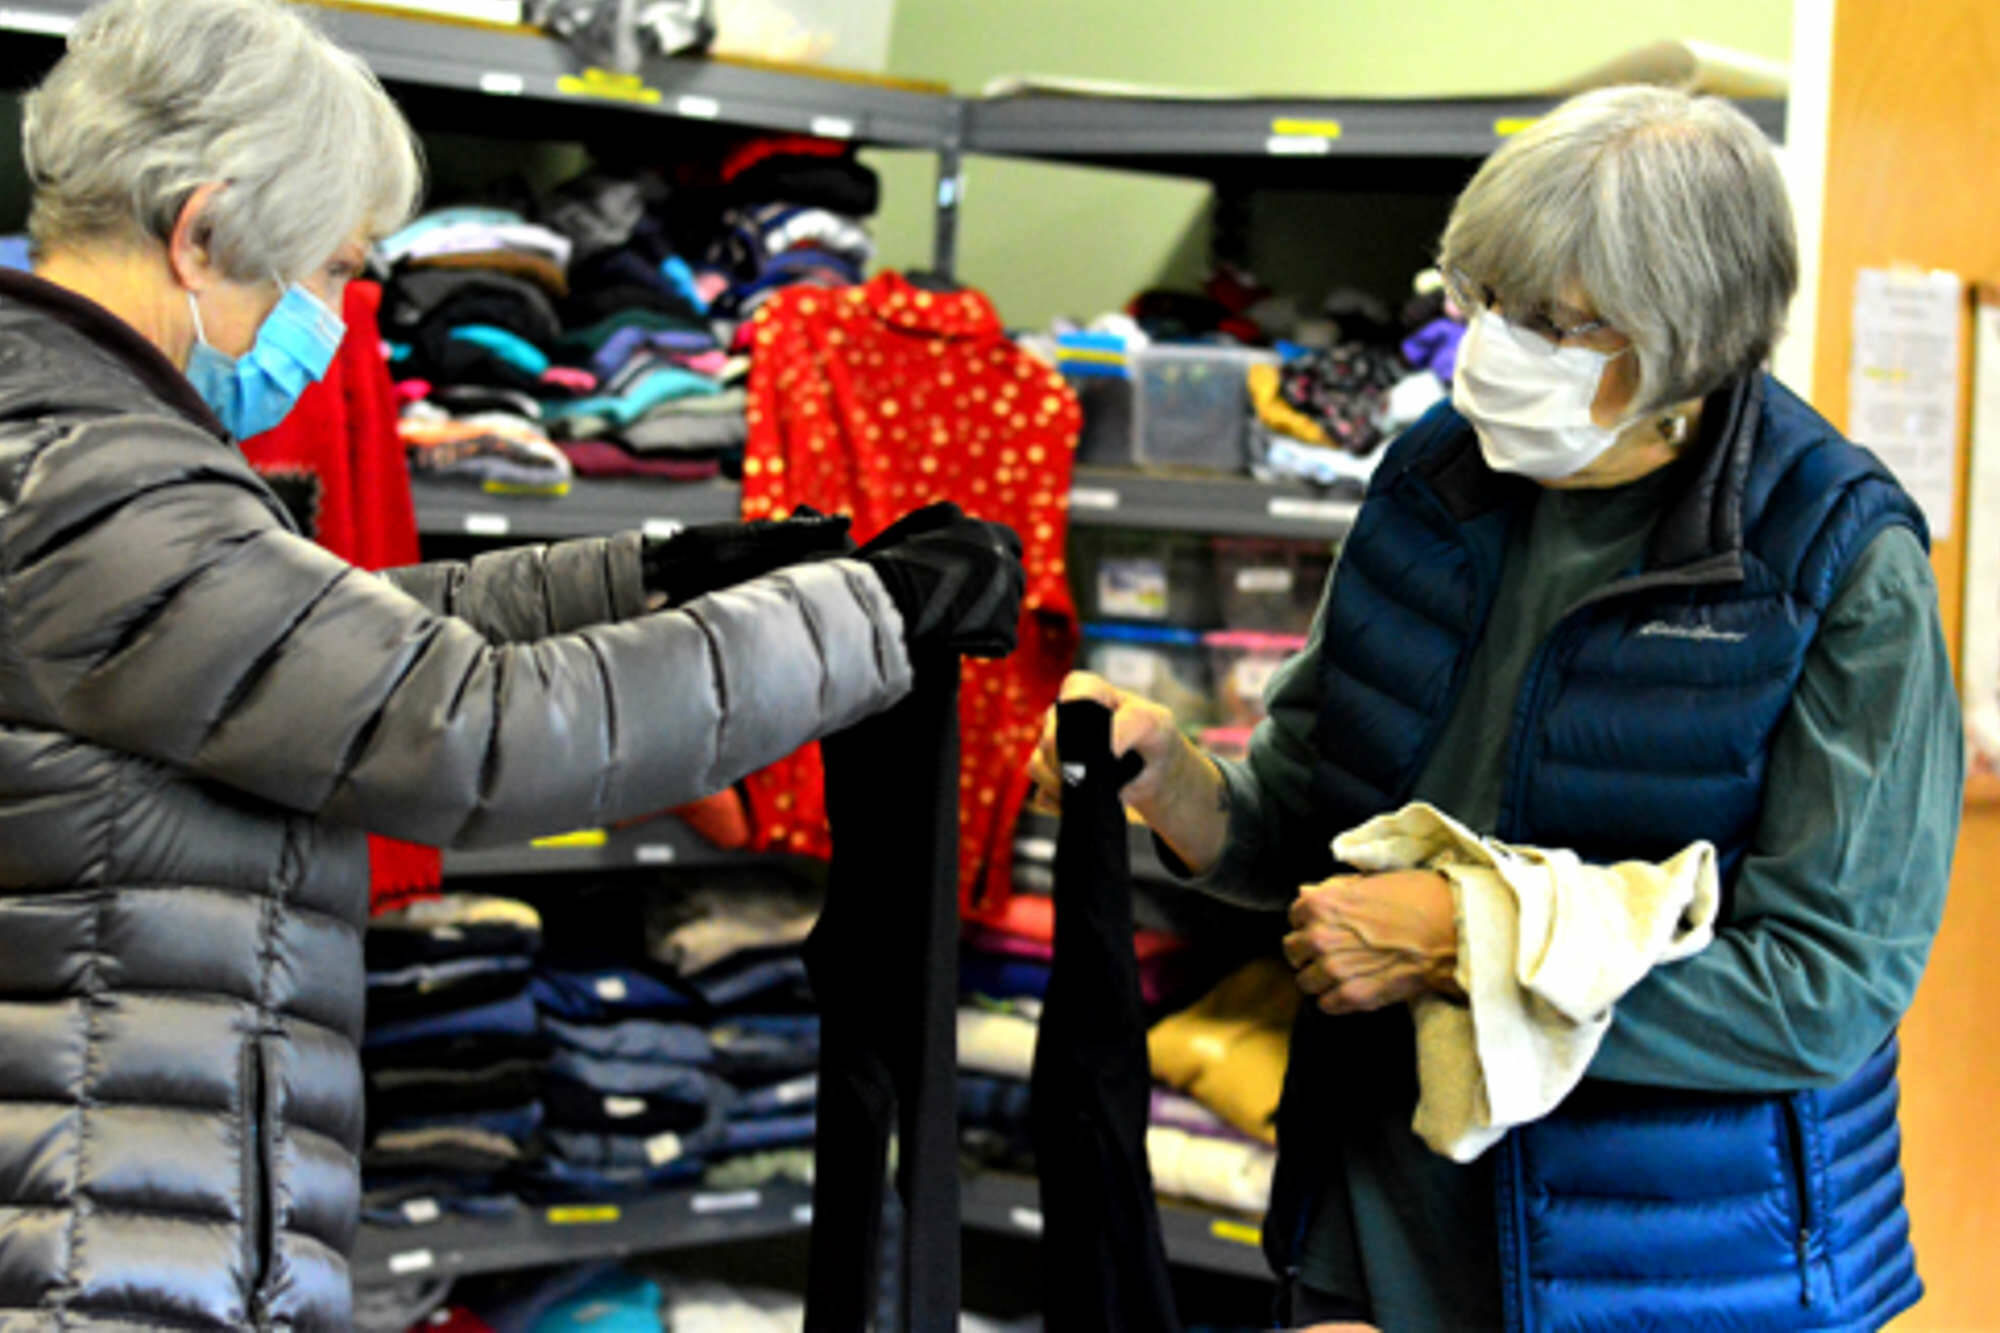 Volunteers A.J. Laverty, left, and Marsha Hamacher organize the winter outfits at the Community United Methodist Church’s clothing room. The room is open for free shopping on Saturdays. (Diane Urbani de la Paz/Peninsula Daily News)